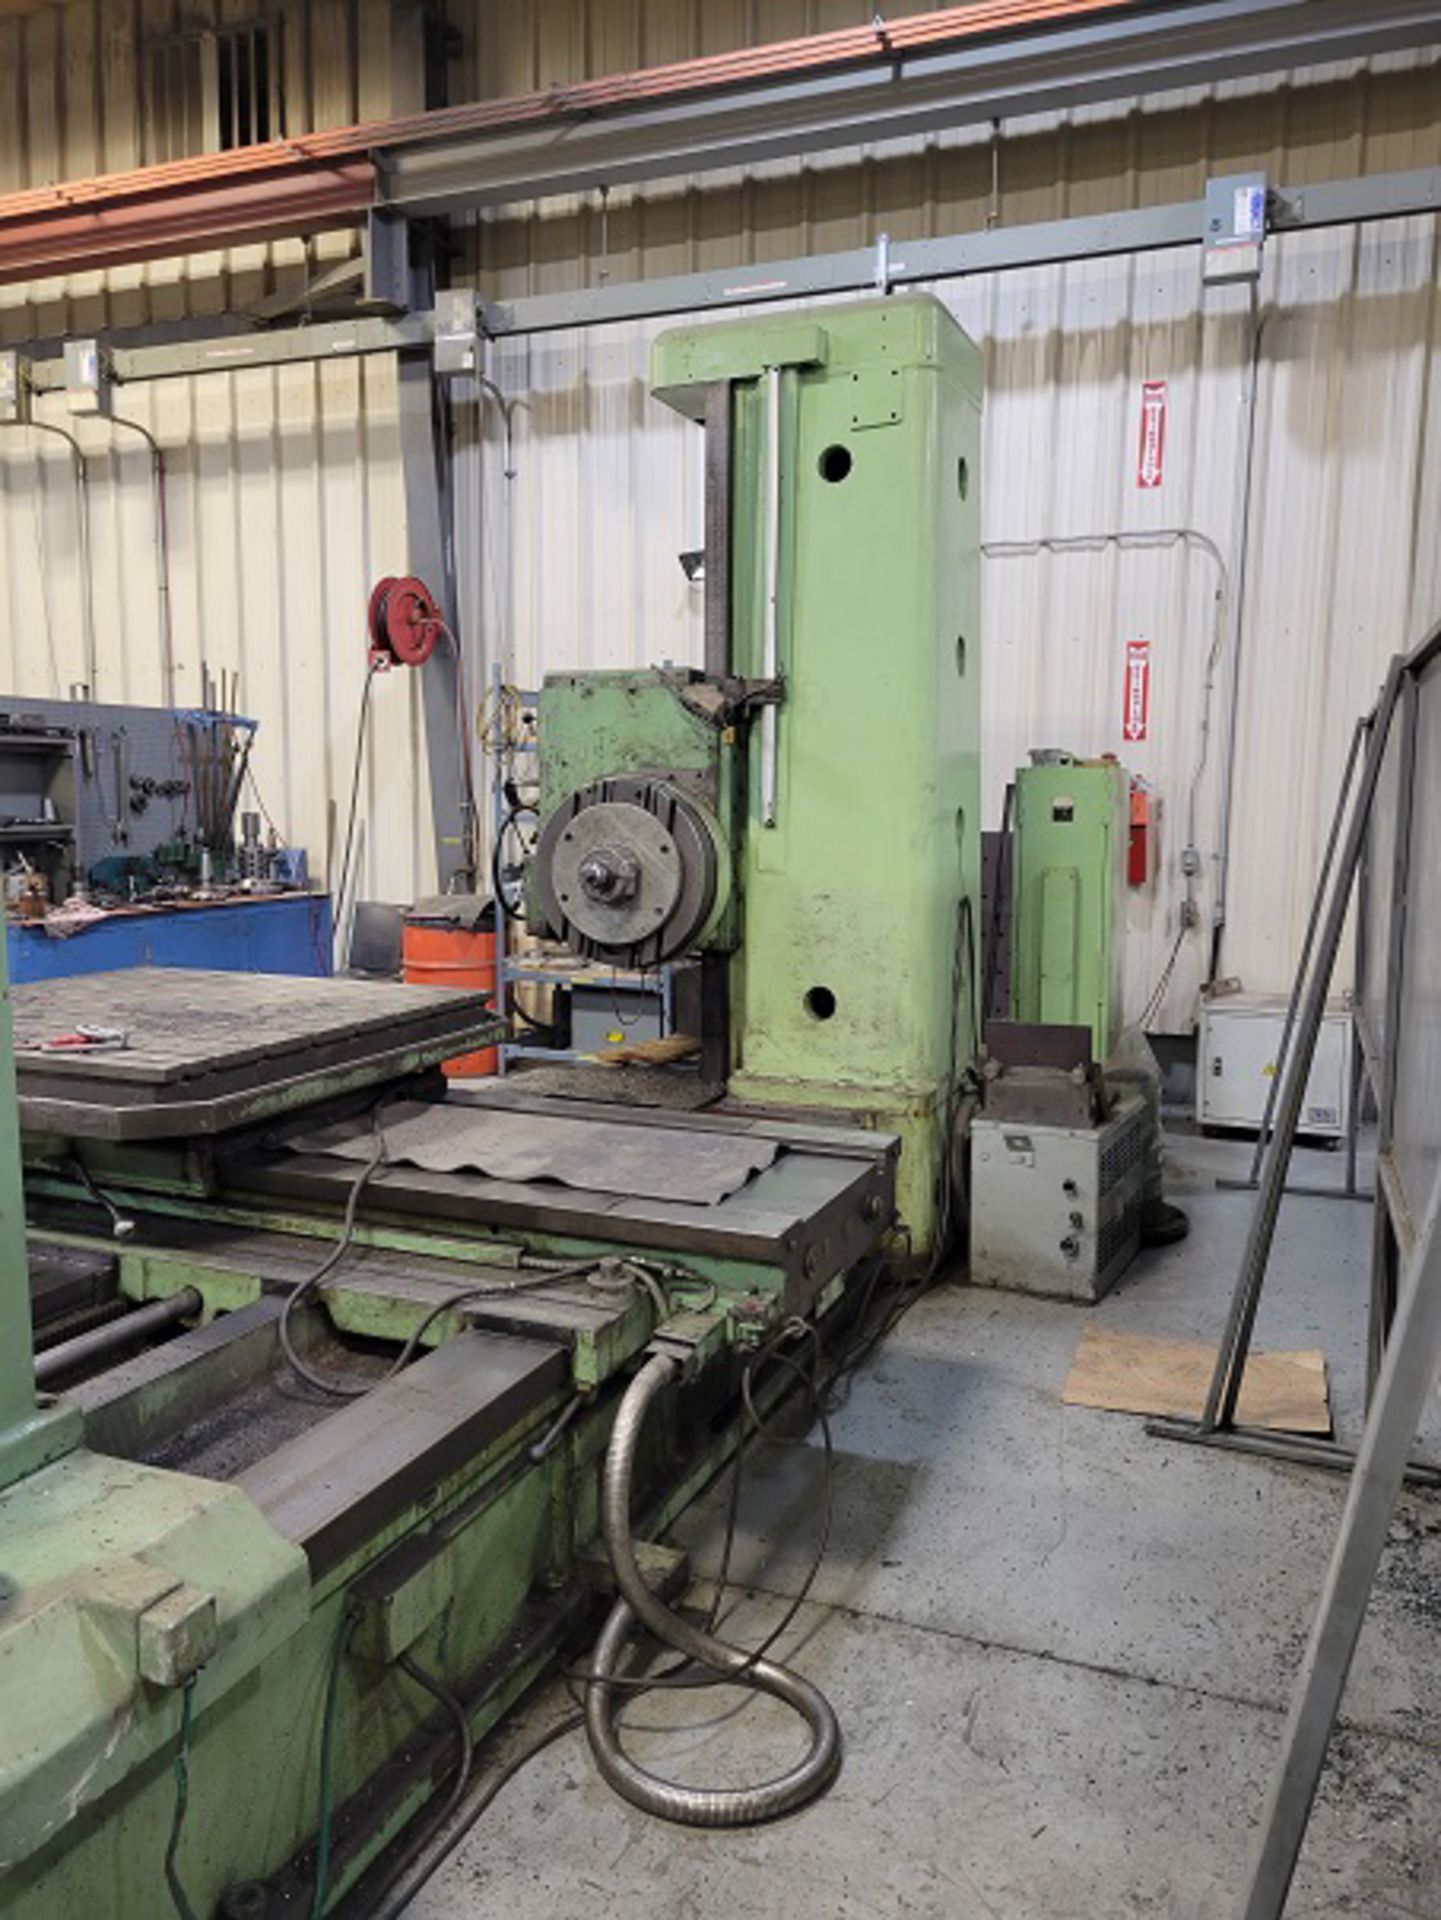 TOS VARNSDORF W100A TABLE TYPE HORIZONTAL BORING MILL WITH 4" SPINDLE, 49.2" X 49.2" ROTARY POWER